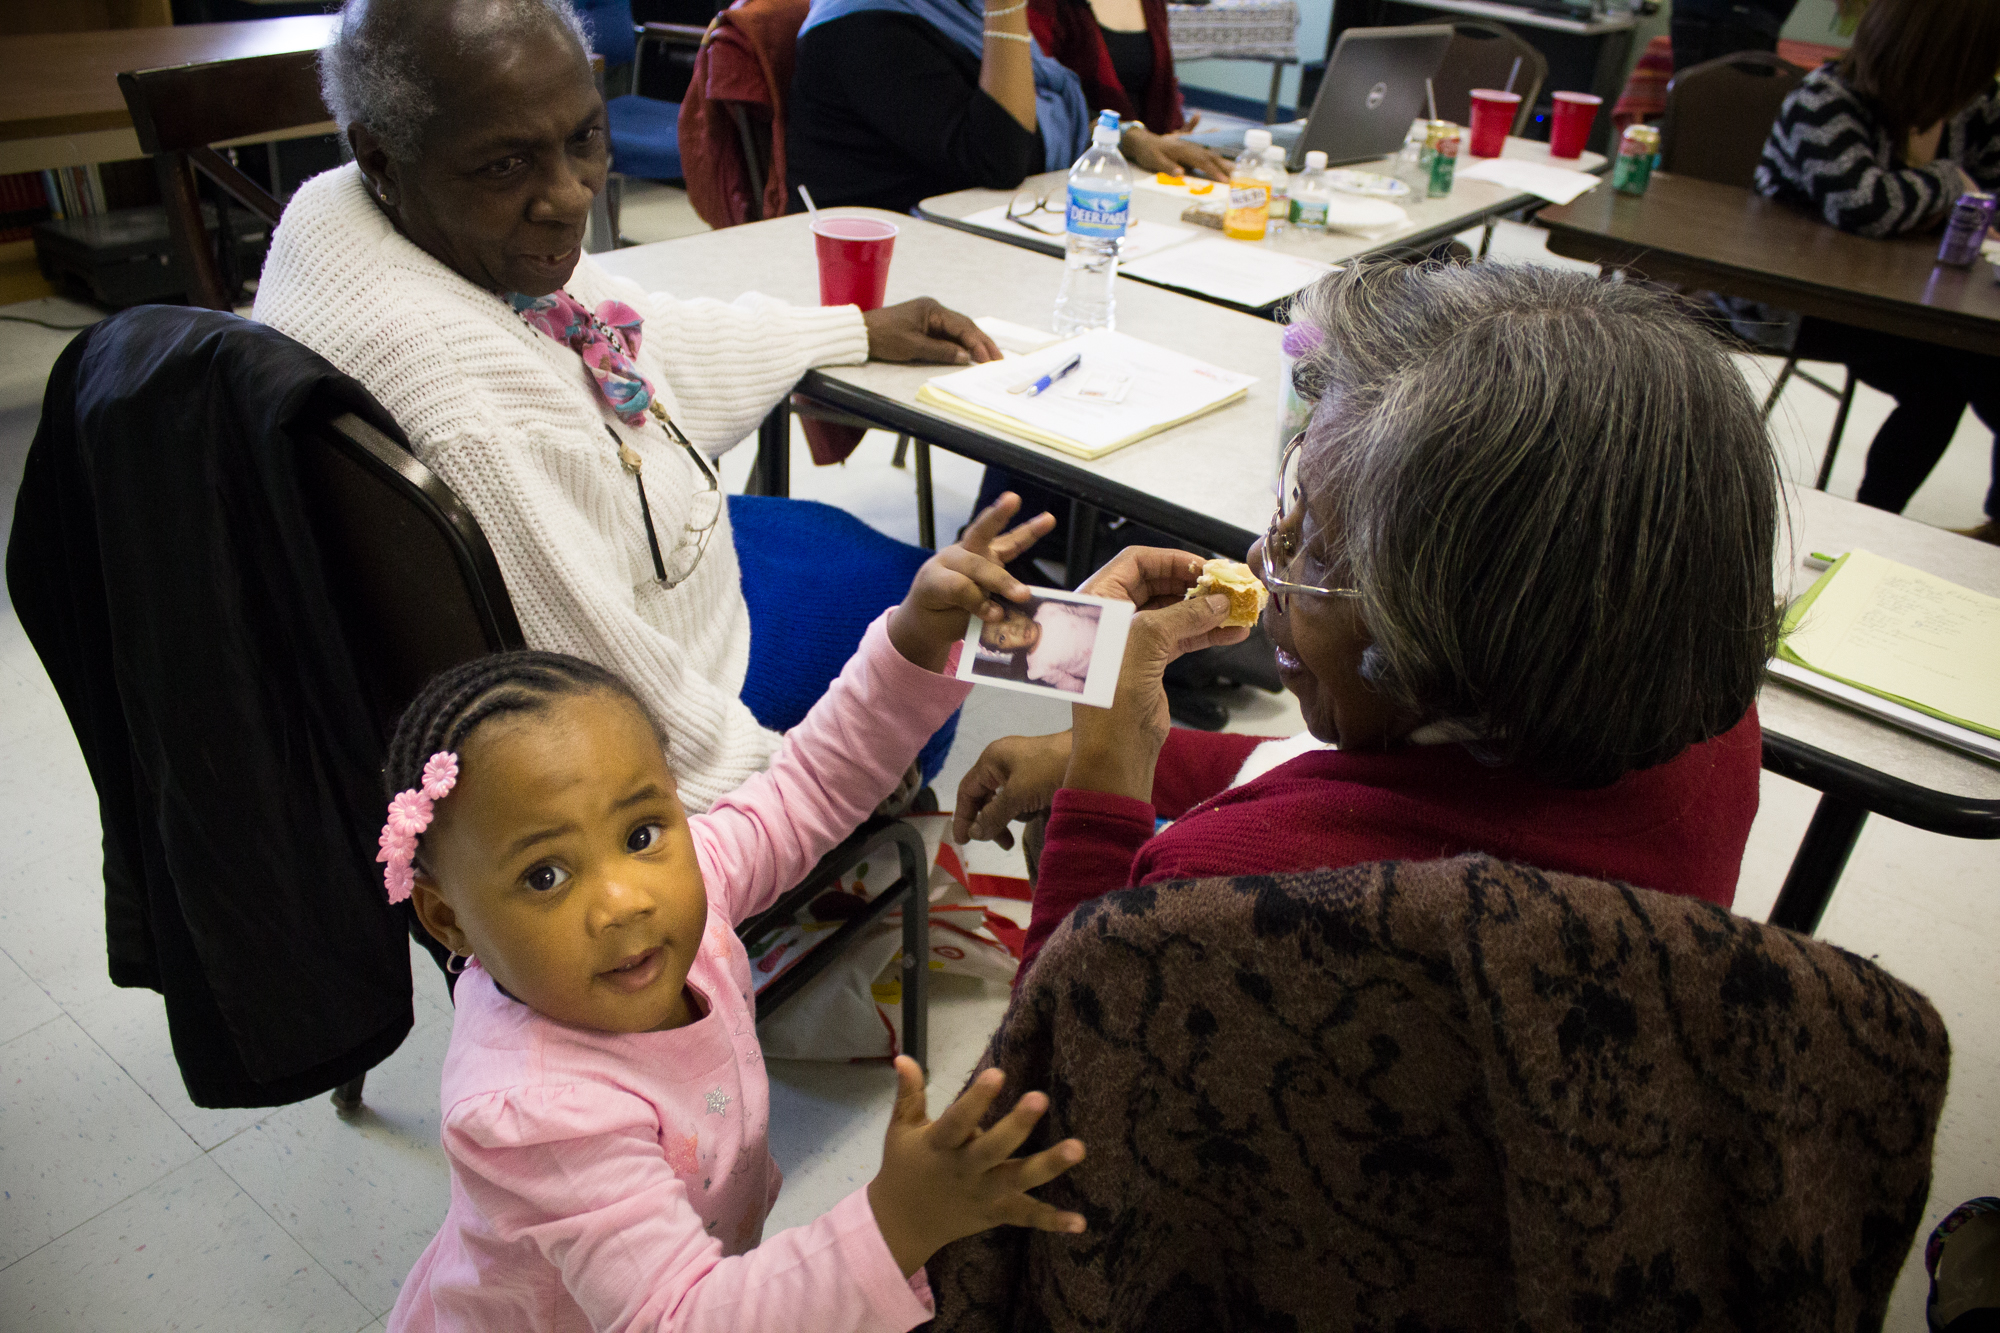  Malayja Tooles, 2, shows a photo of herself to Mary Bell, 83,&nbsp;during The Redline Project workshop at The Dixon House in Point Breeze January 16, 2016. 